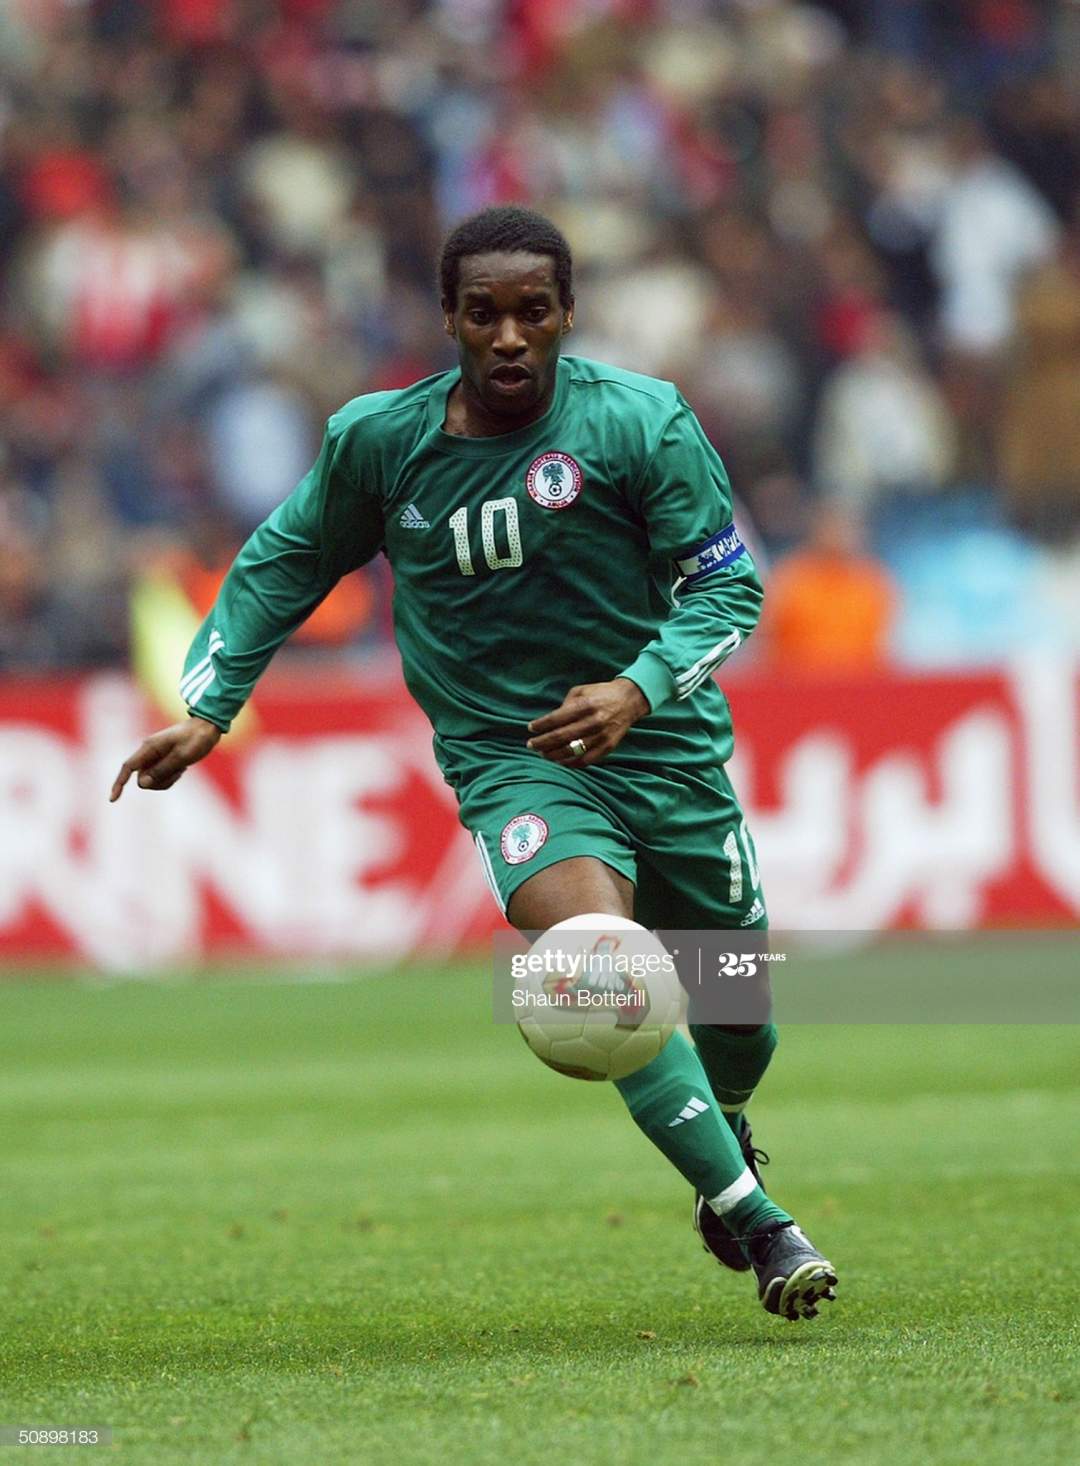 Ex-Liverpool star claims Okocha was denied best player of all time for 1 reason